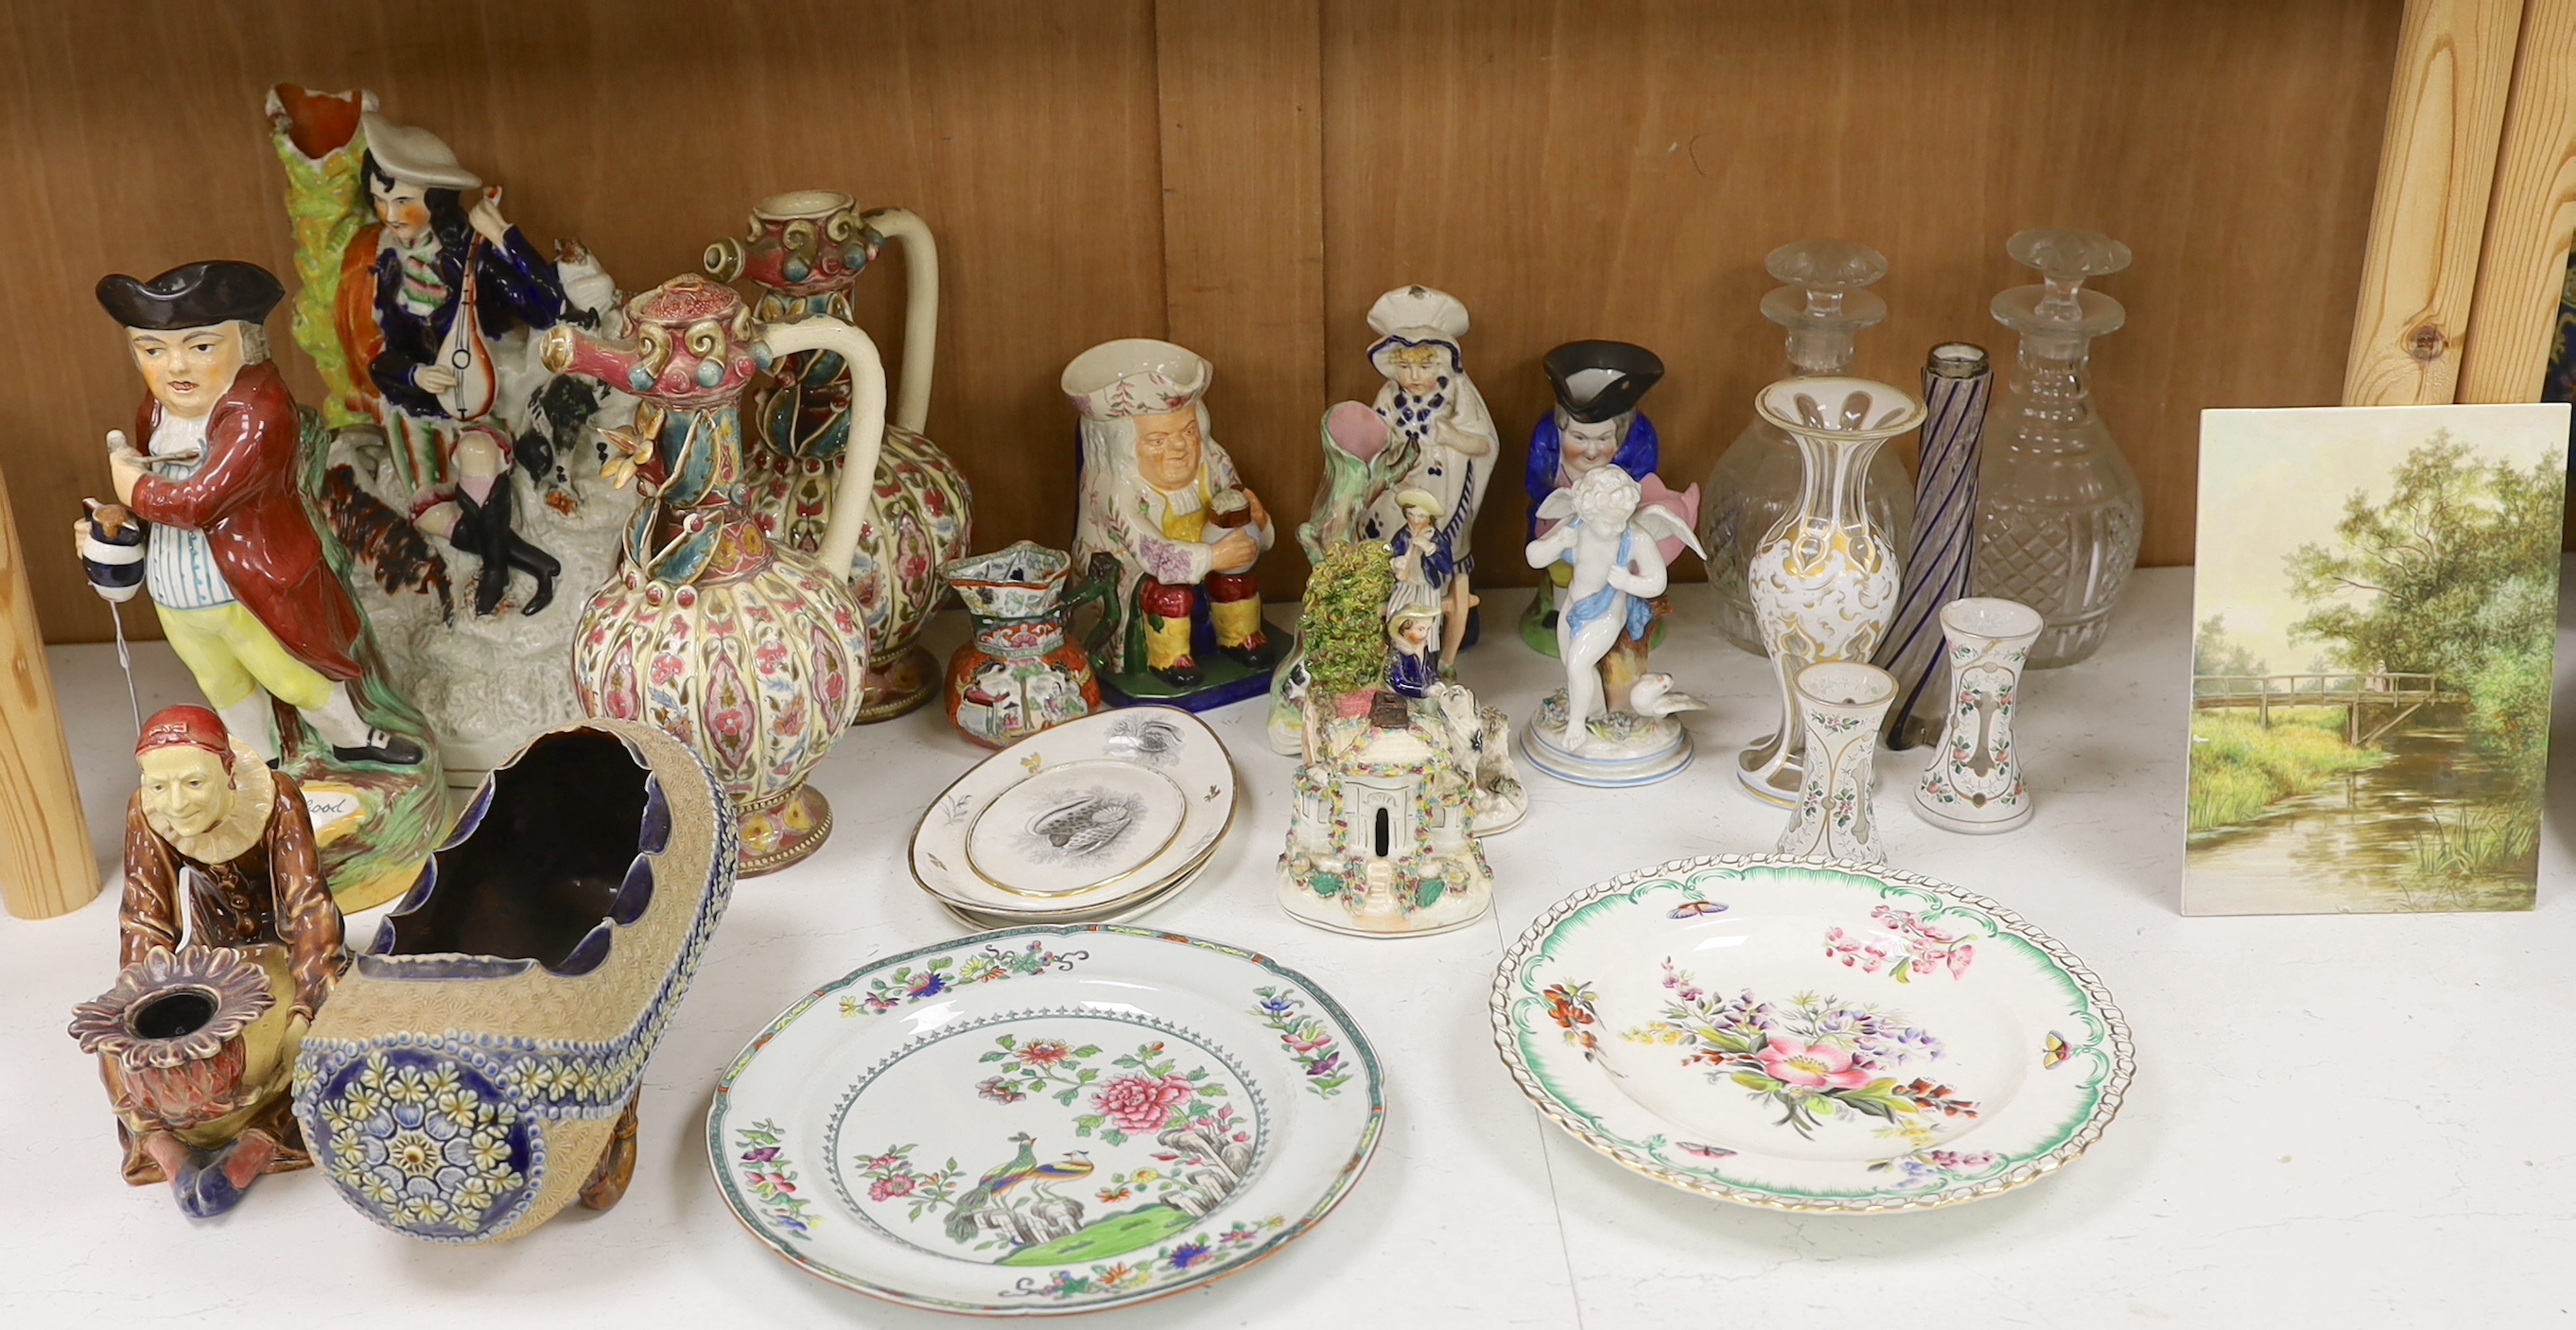 A quantity of mixed ceramics and glass to include Staffordshire, Zsolnay, Spode etc. Condition - poor